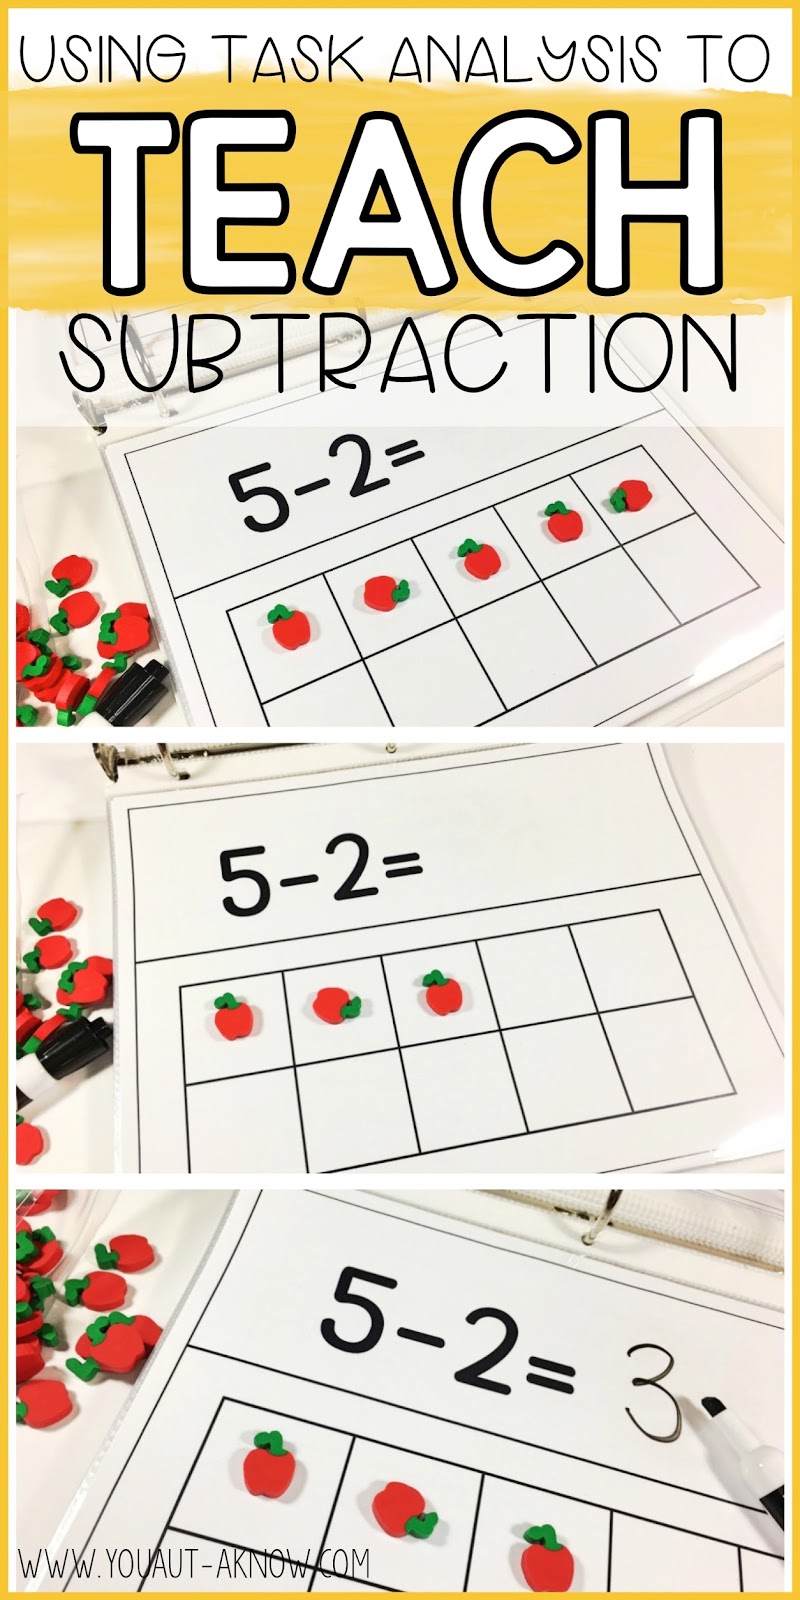 Using Task Analysis to teach Subtraction has been the perfect approach in my Autism classroom. Students are taught through a process of prompting and fading to complete subtraction problems.